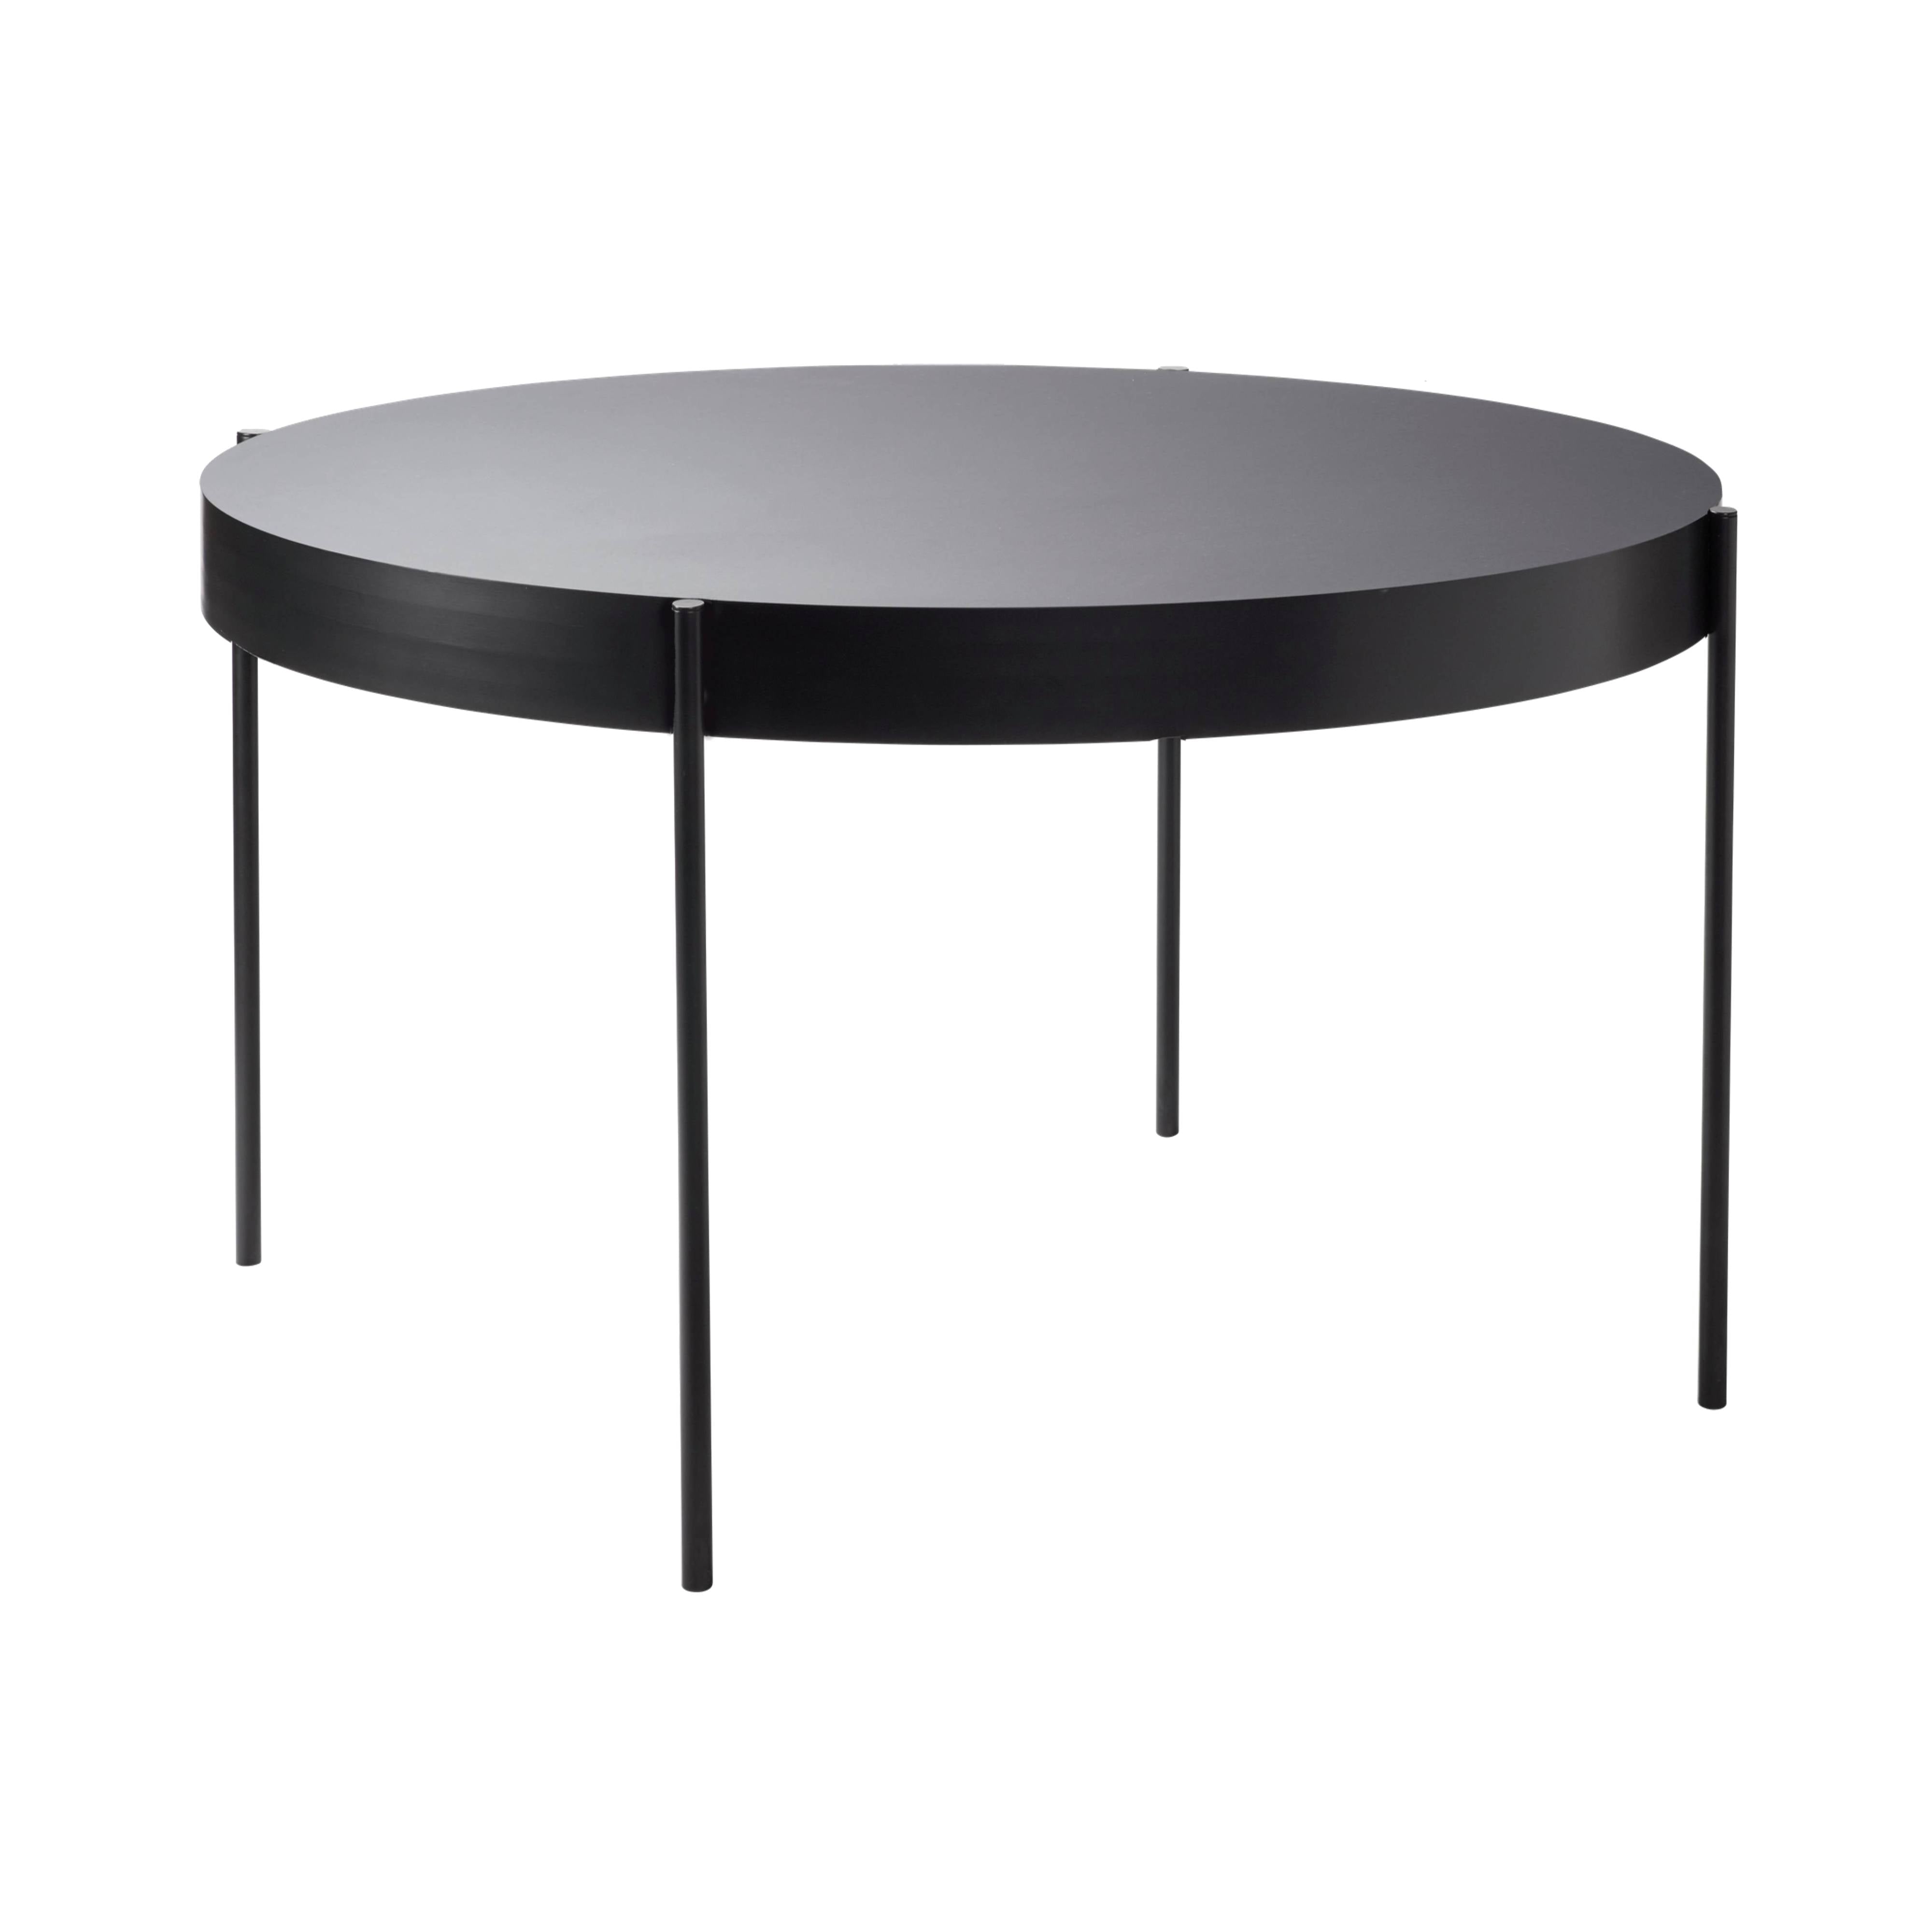 Series 430 Table: Large - 63